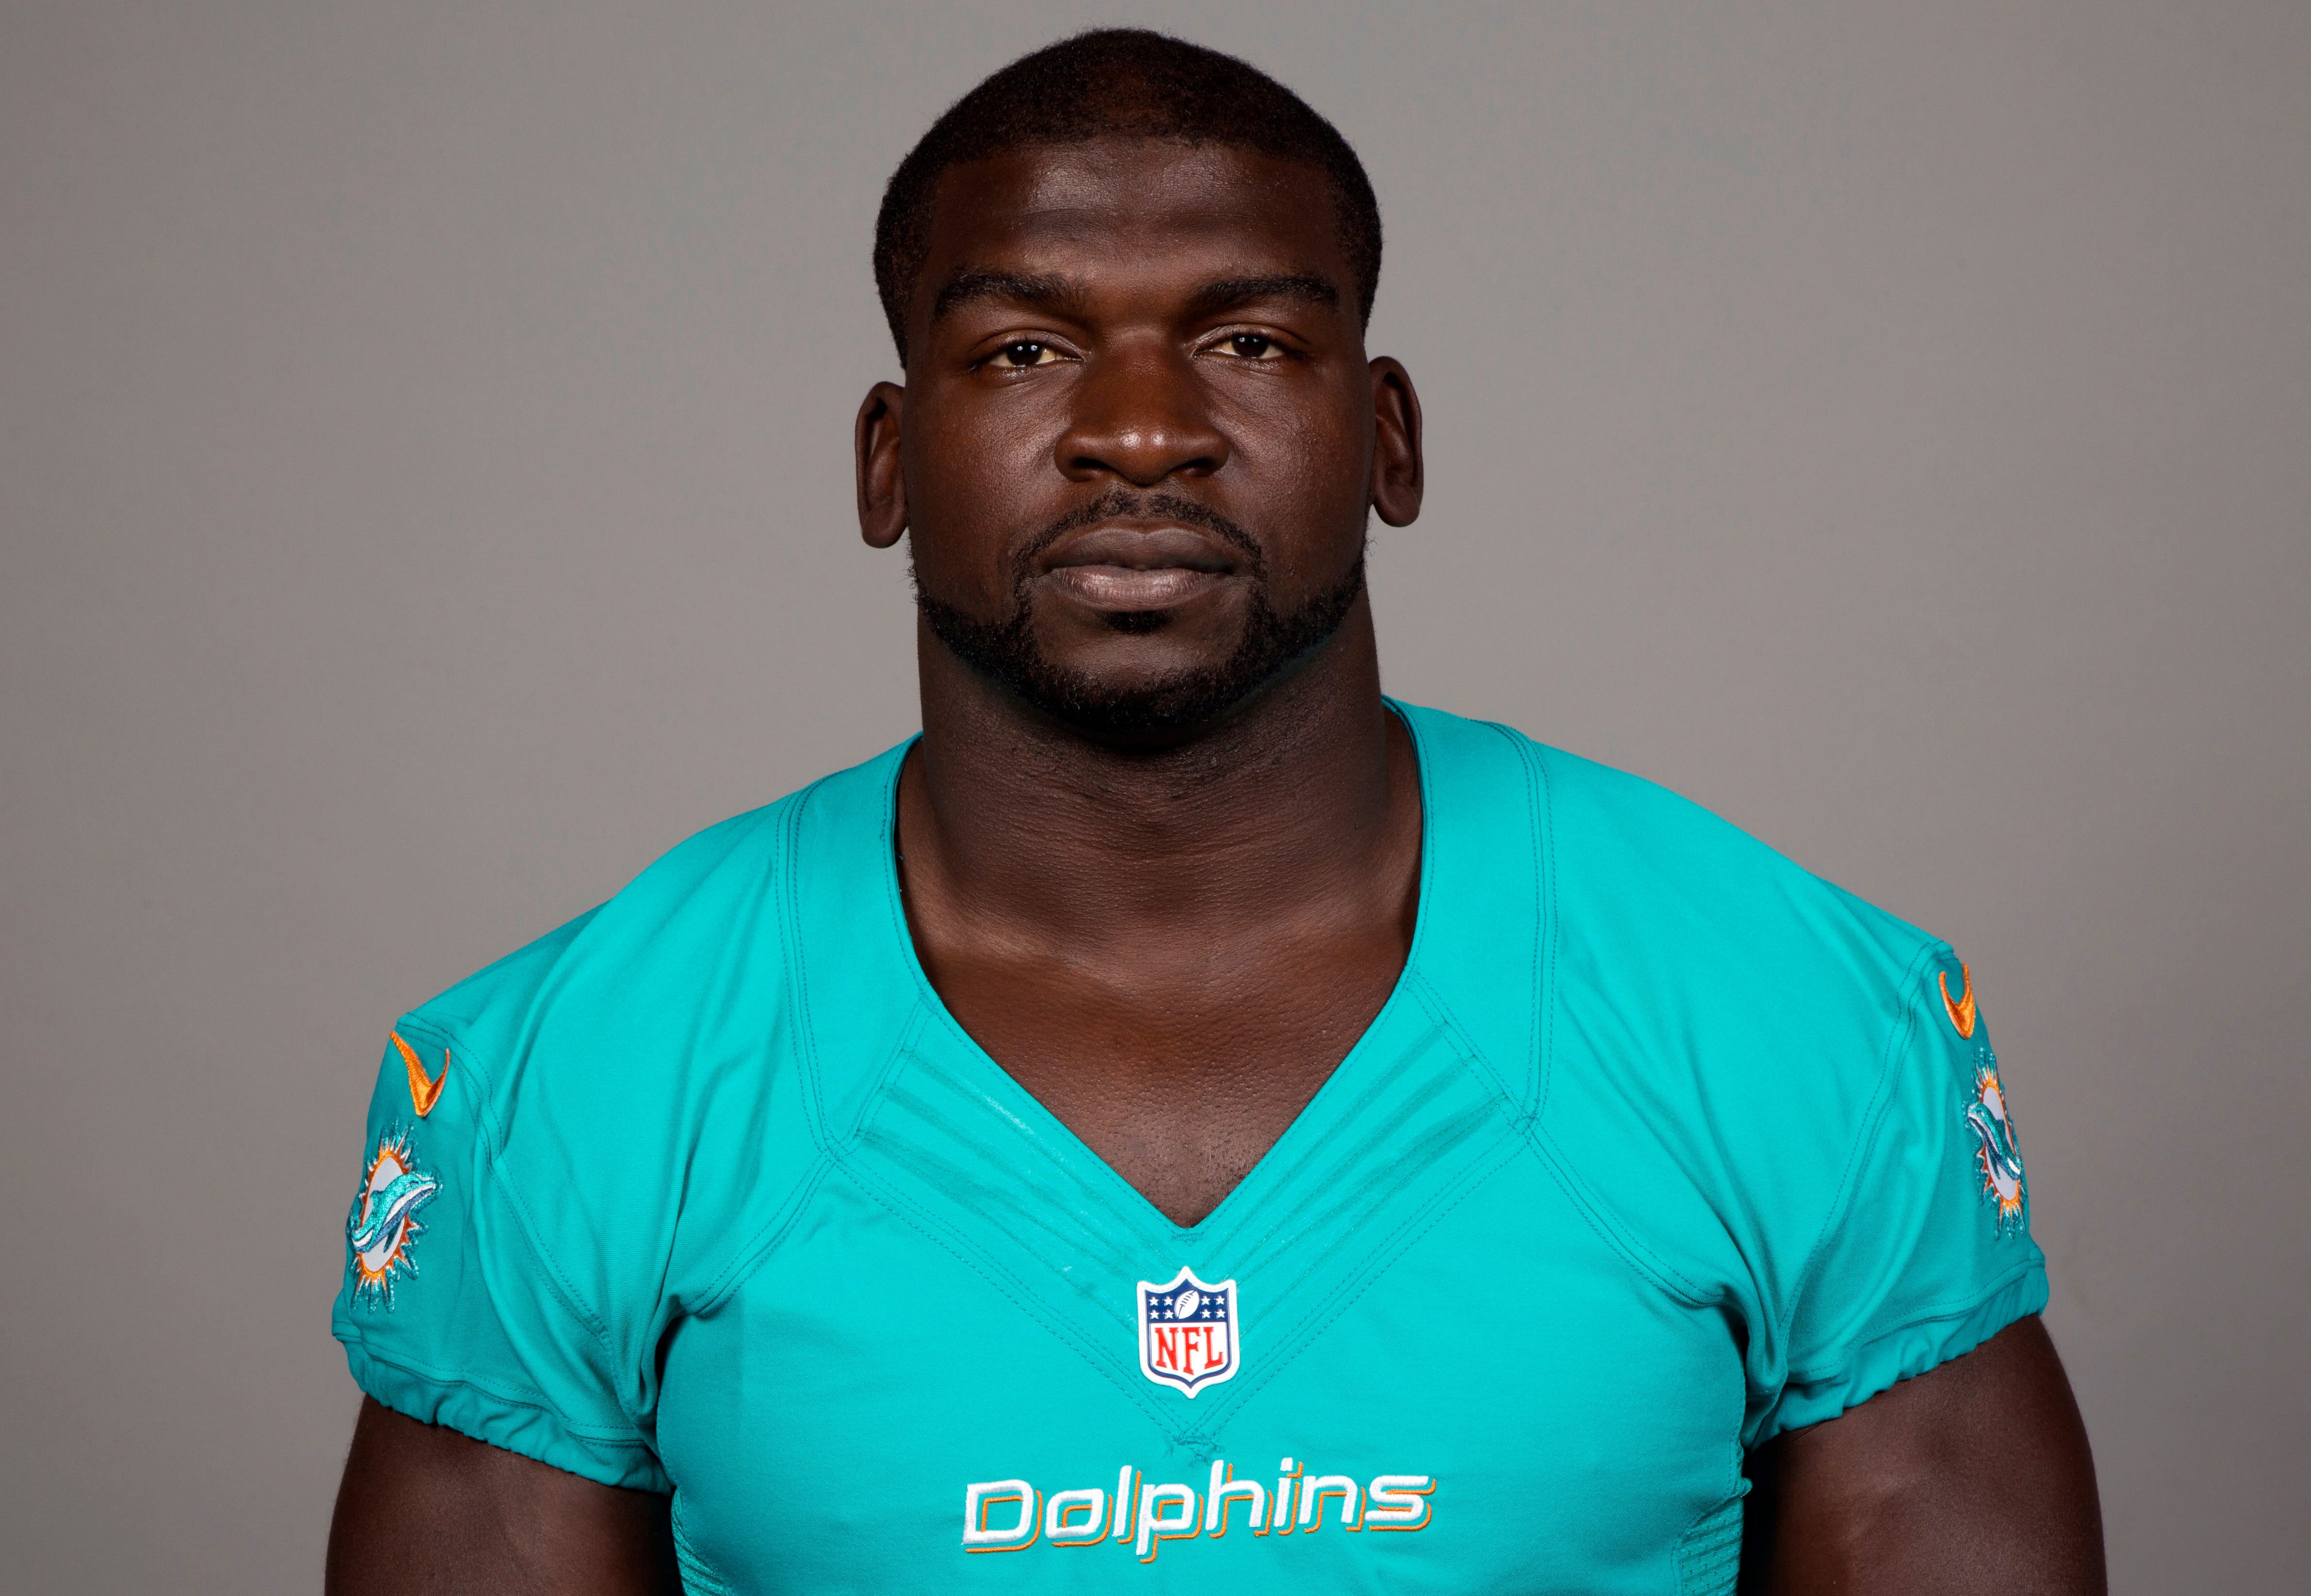 Dolphins suspend Timmons and acquire Anthony as replacement